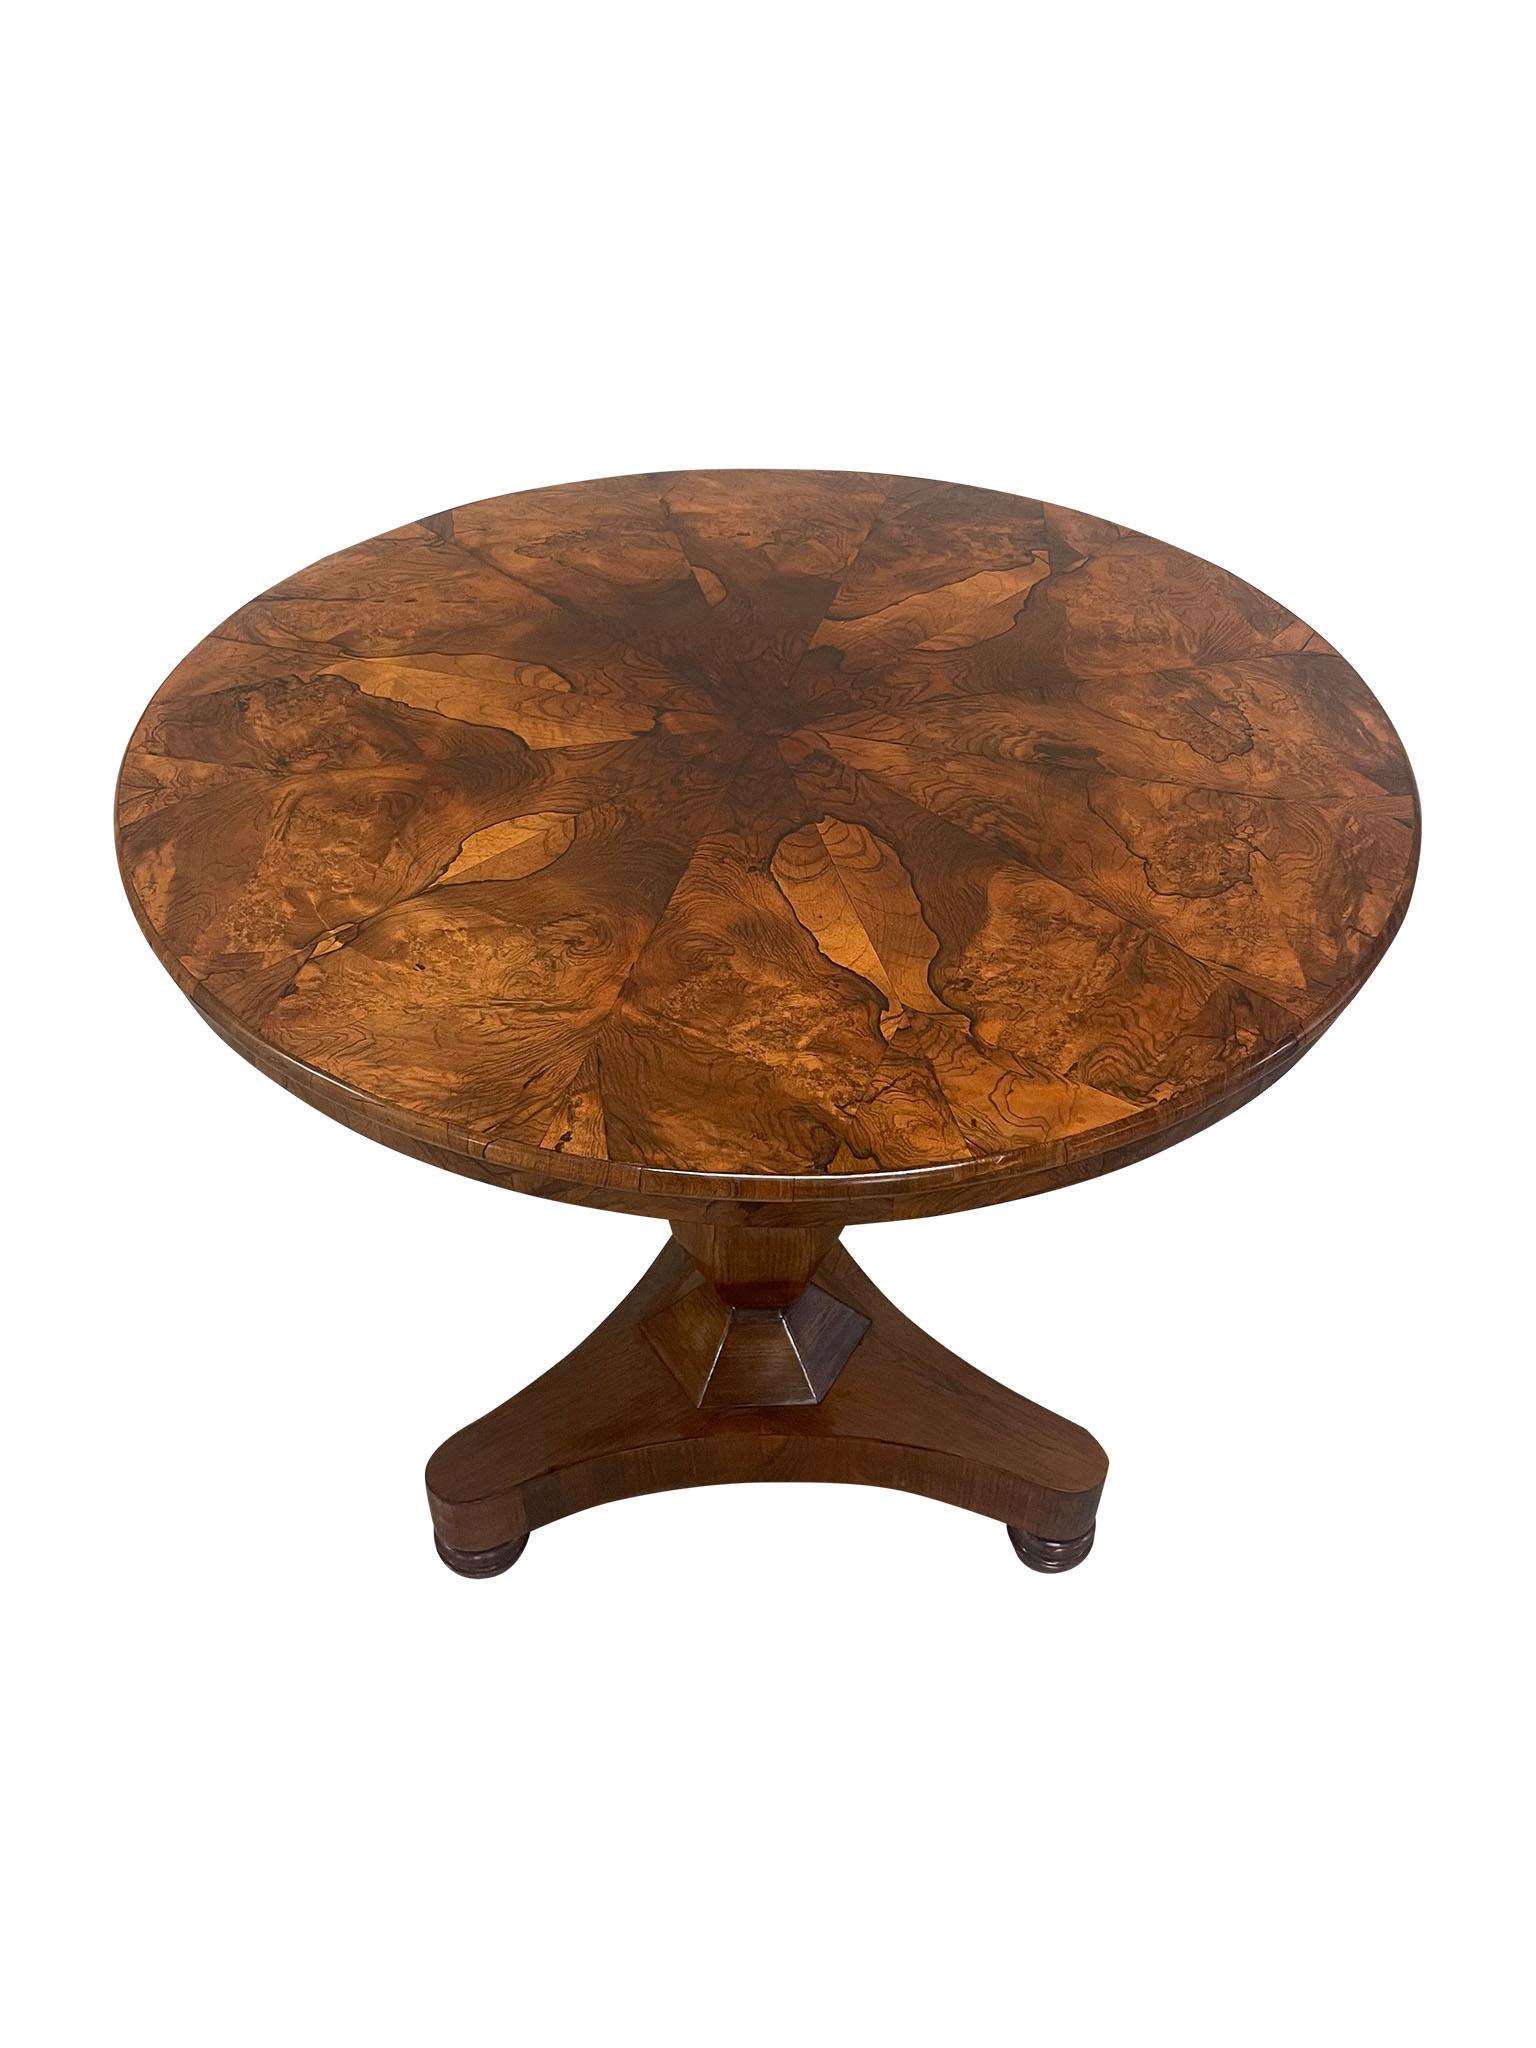 This is a wonderful 19th century Pedestal Table, crafted in walnut and burled walnut veneer. Characterized by its rounded top, apron drop feature, and tripod plinth with working hard wood casters, the burled veneer creates an organic and captivating